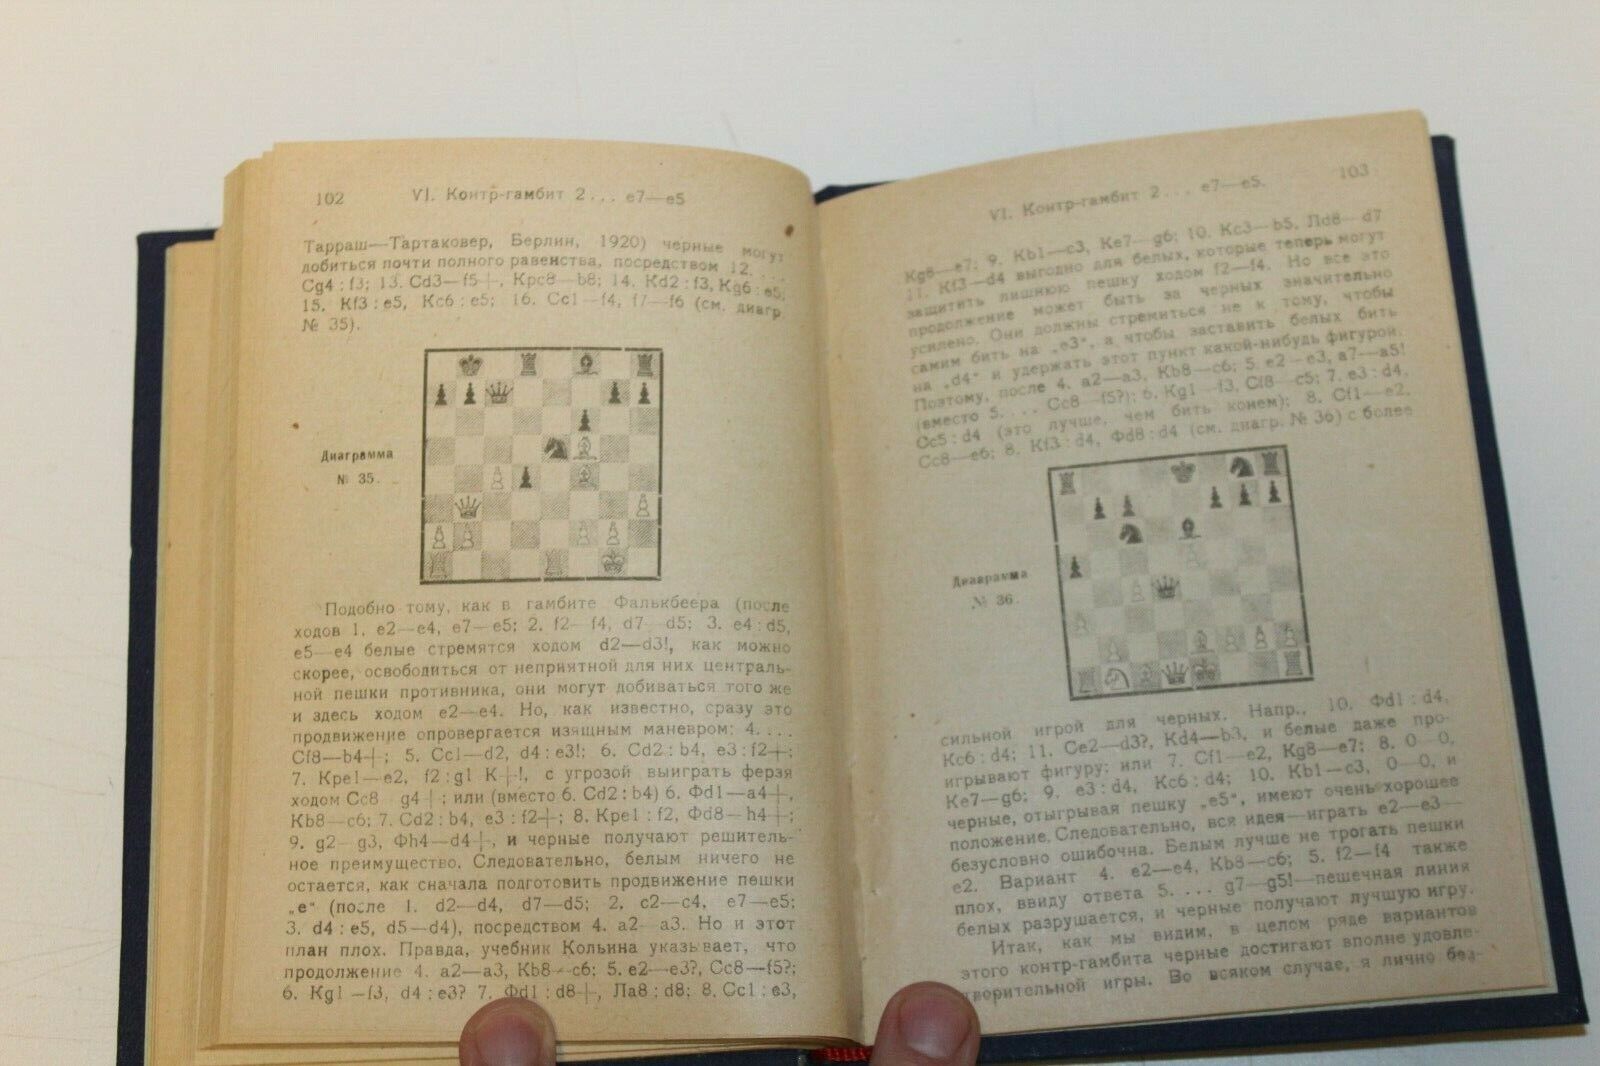 11538.Russian chess book: S. Tarrasch. 1925.Protection of the Queen's gambit